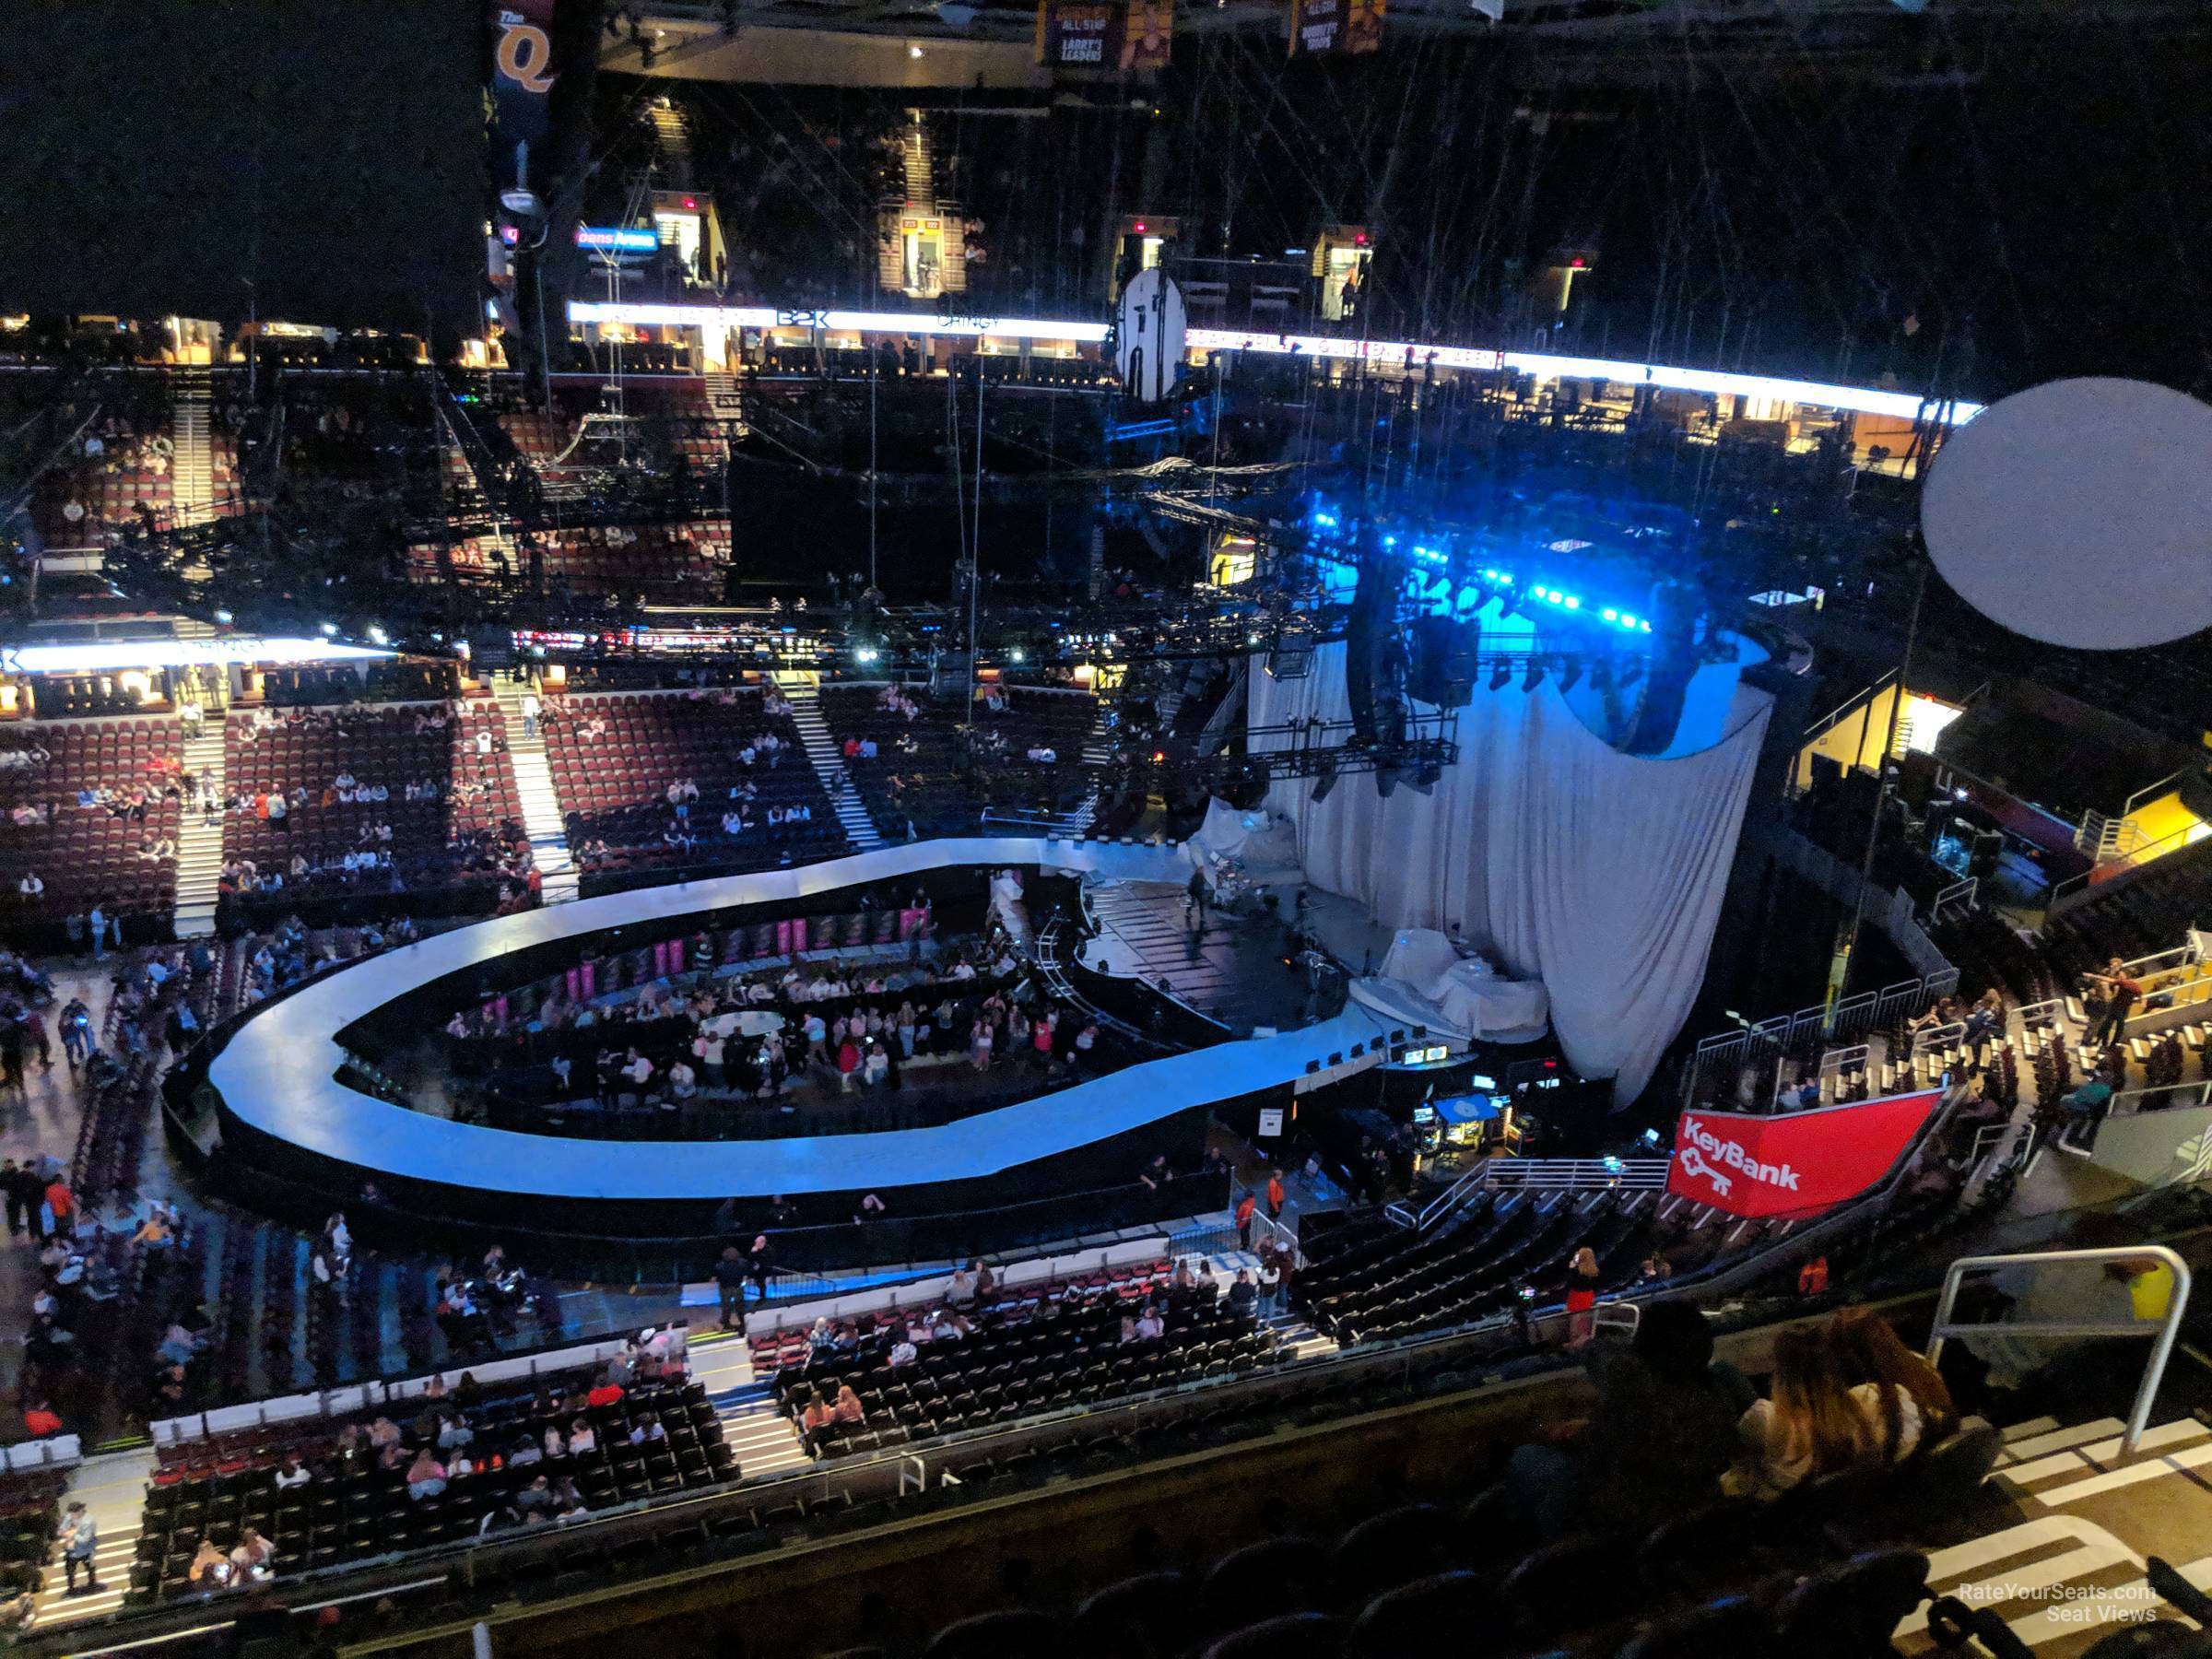 section 223, row 7 seat view  for concert - rocket mortgage fieldhouse